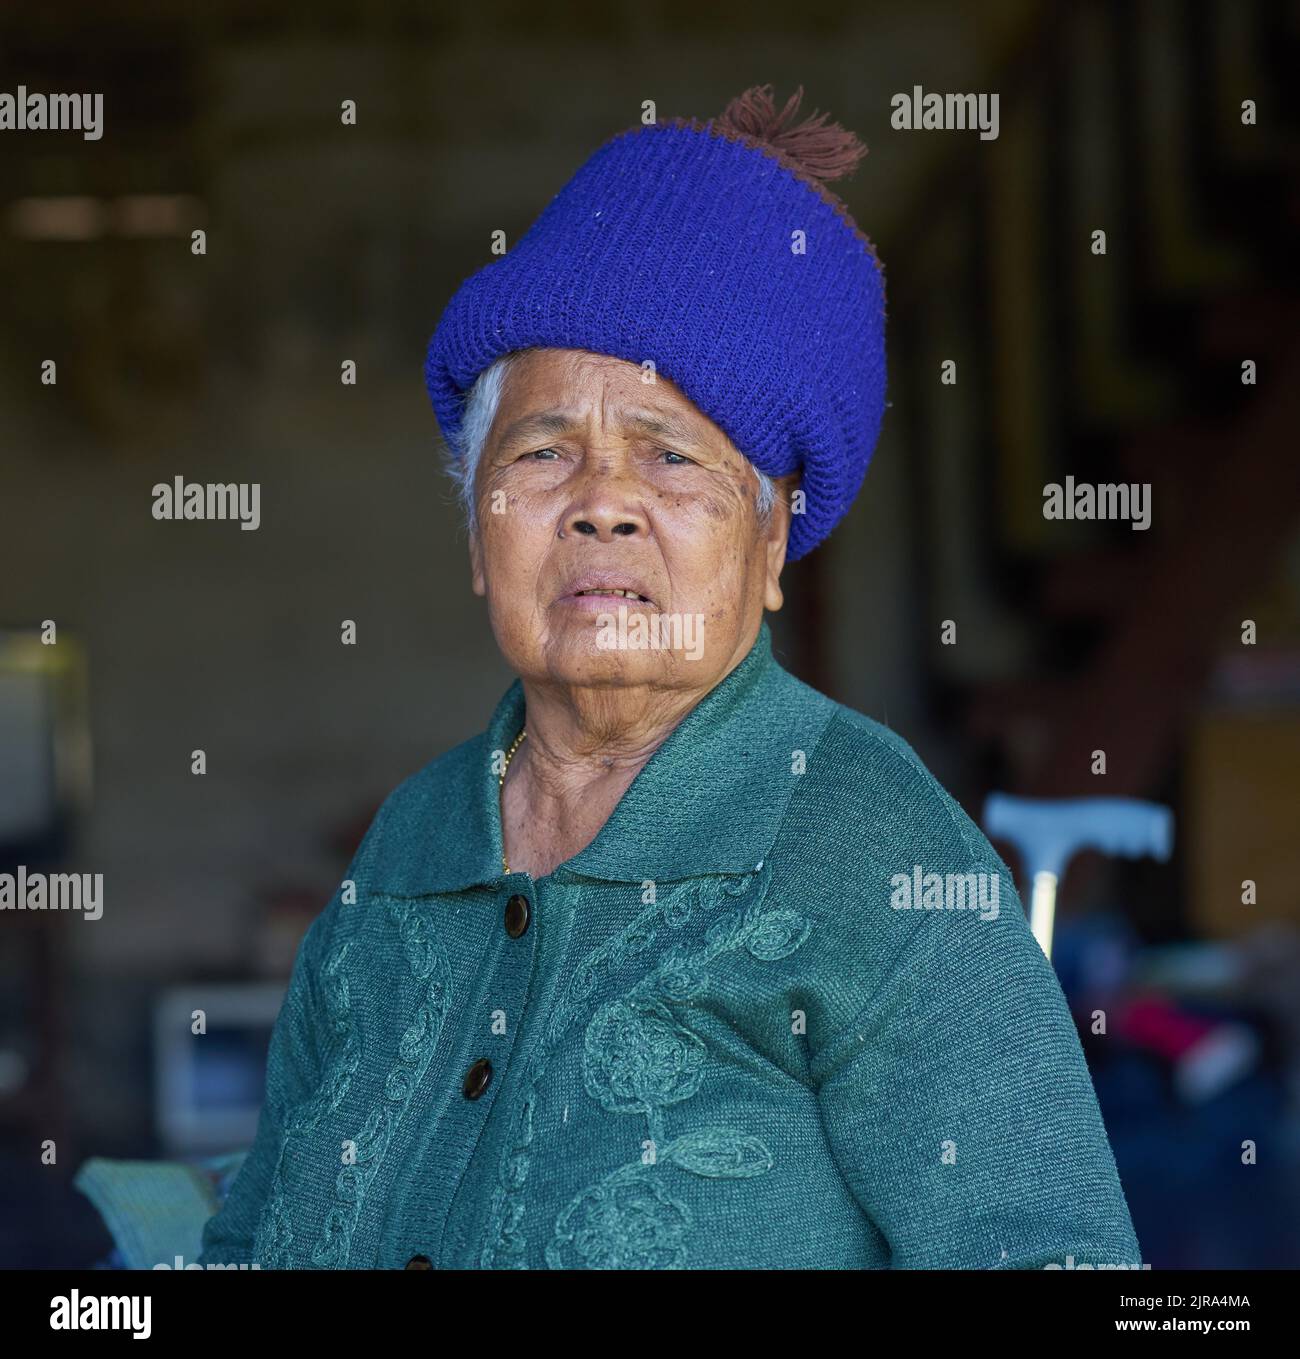 A portrait of an old ethnic lady in a blue hat, taken at Sakon Nakhon, Thailand. Stock Photo